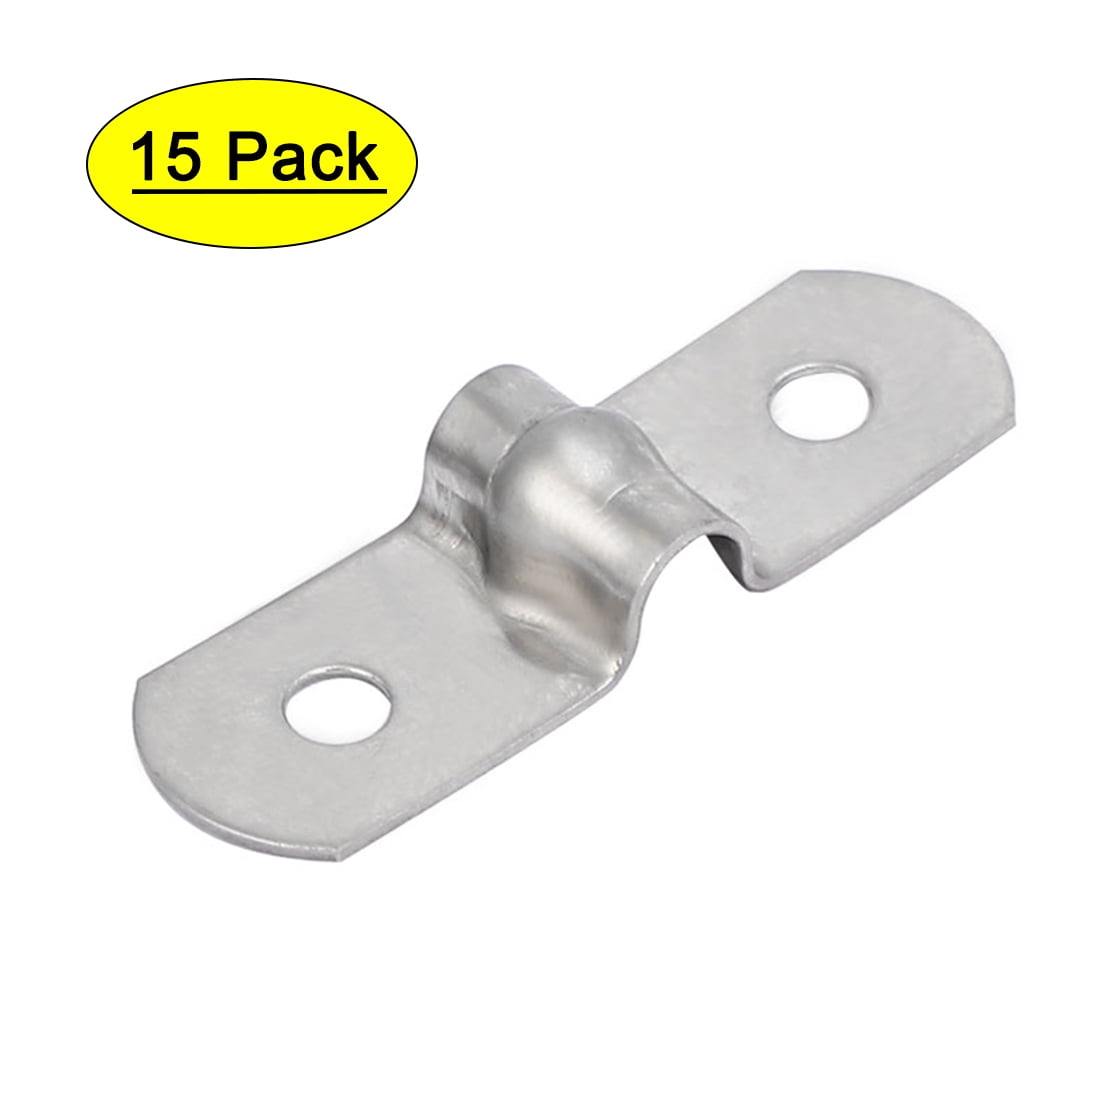 0.55 Rigid Pipe Strap 2 Holes 304 Stainless Steel Tension Tube Clip Clamp 10pcs sourcing map 14mm